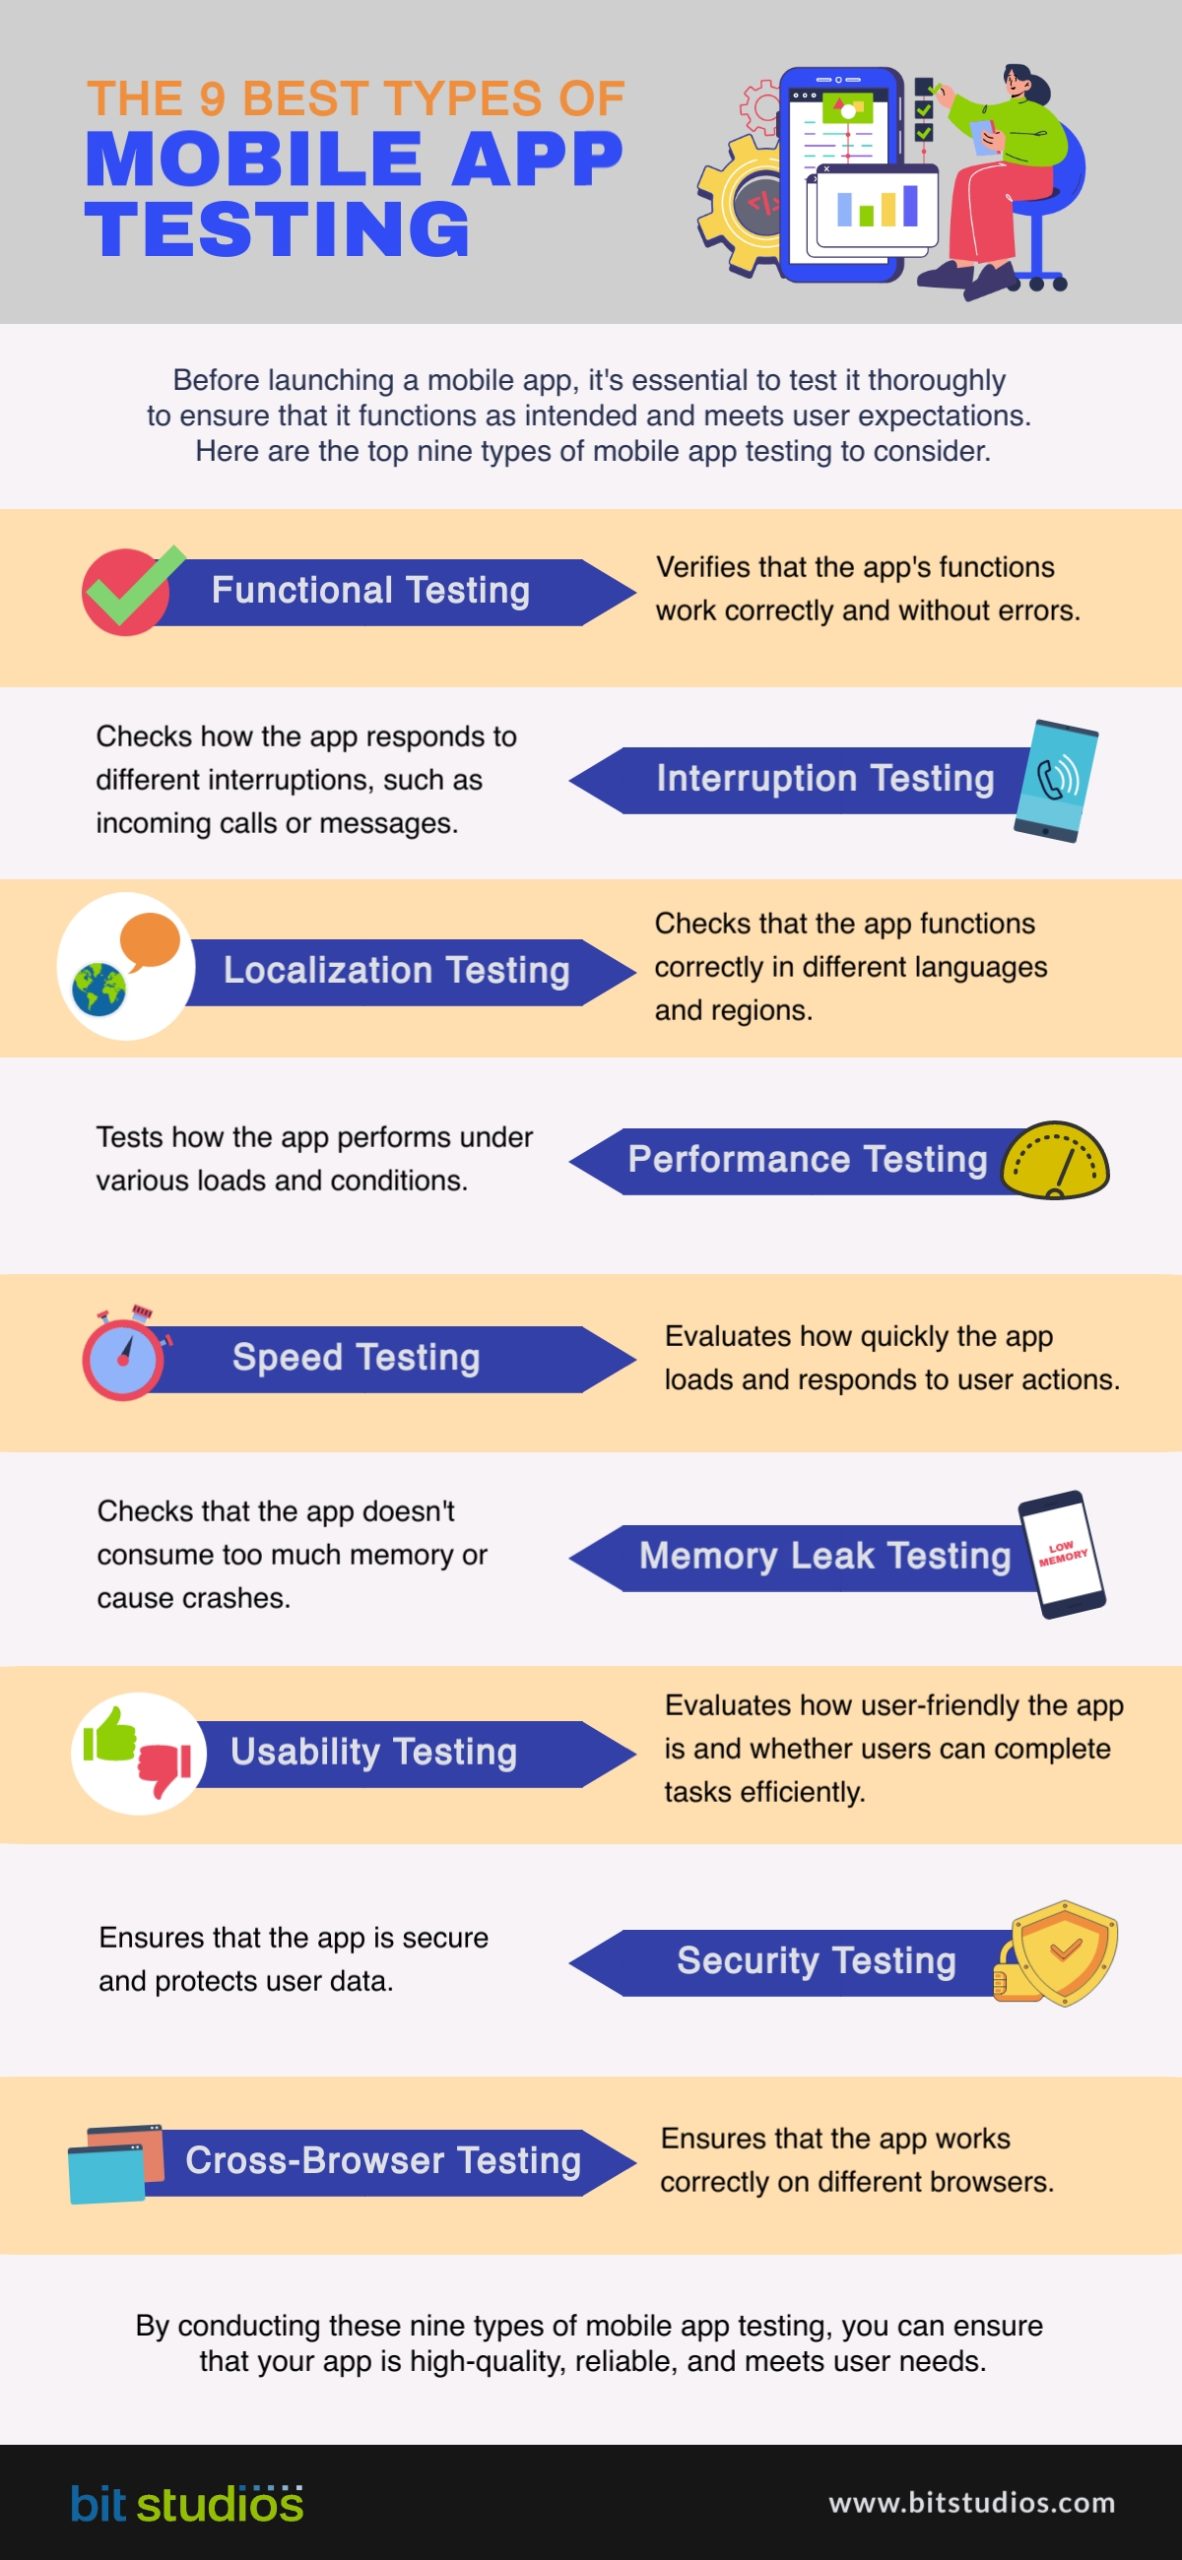 The 9 Best Types of Mobile App Testing - Infographics by BIT Studios